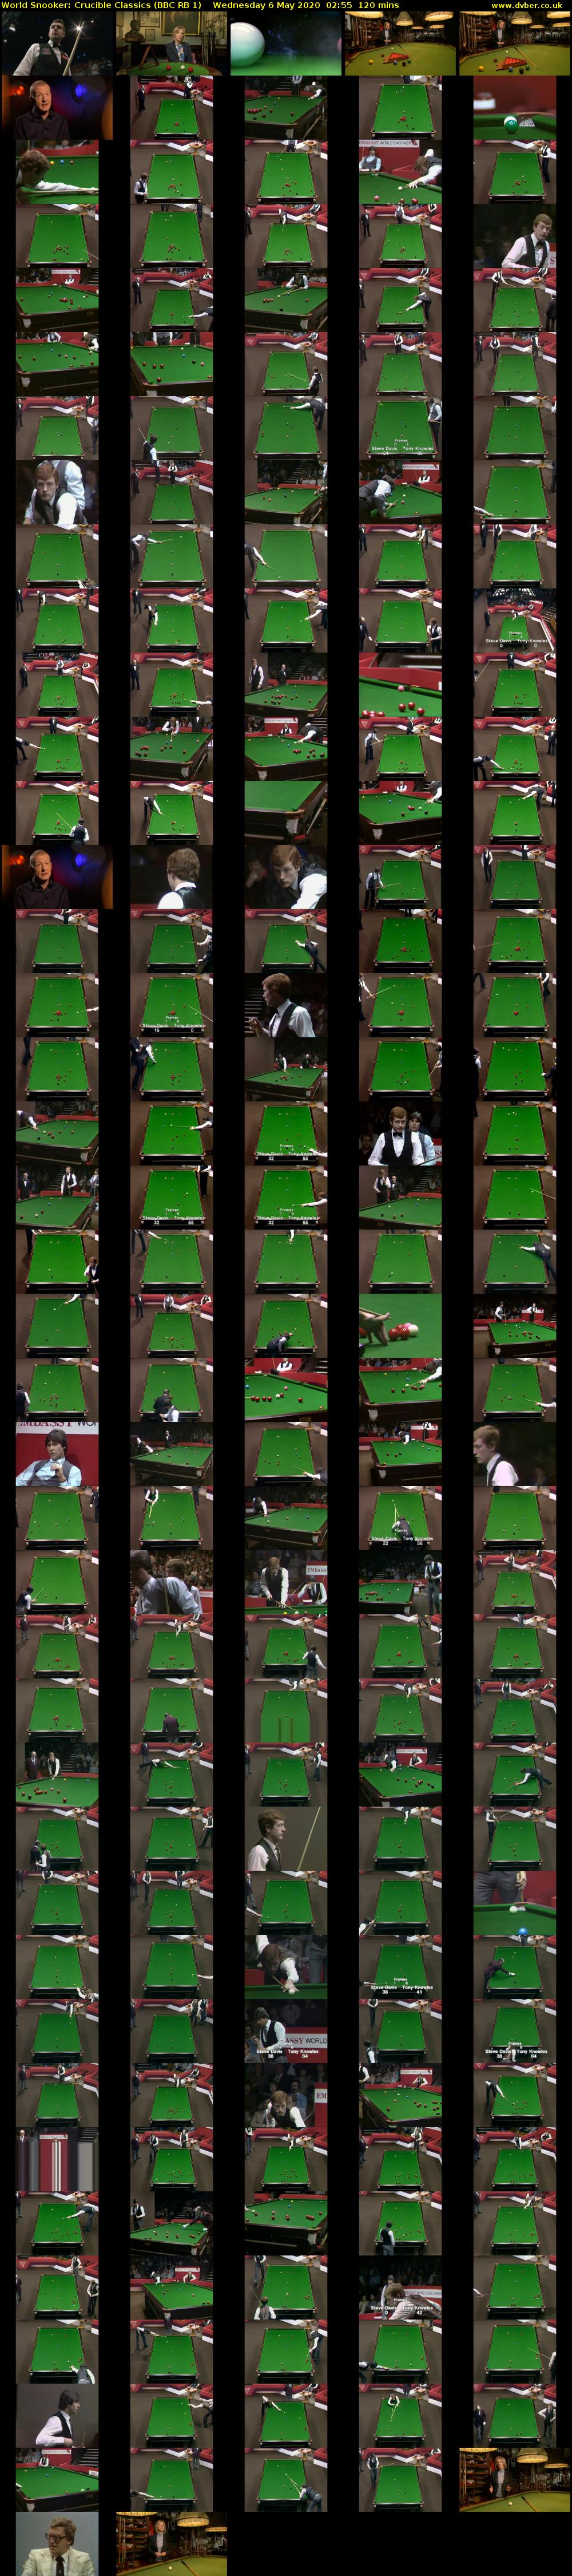 World Snooker: Crucible Classics (BBC RB 1) Wednesday 6 May 2020 02:55 - 04:55